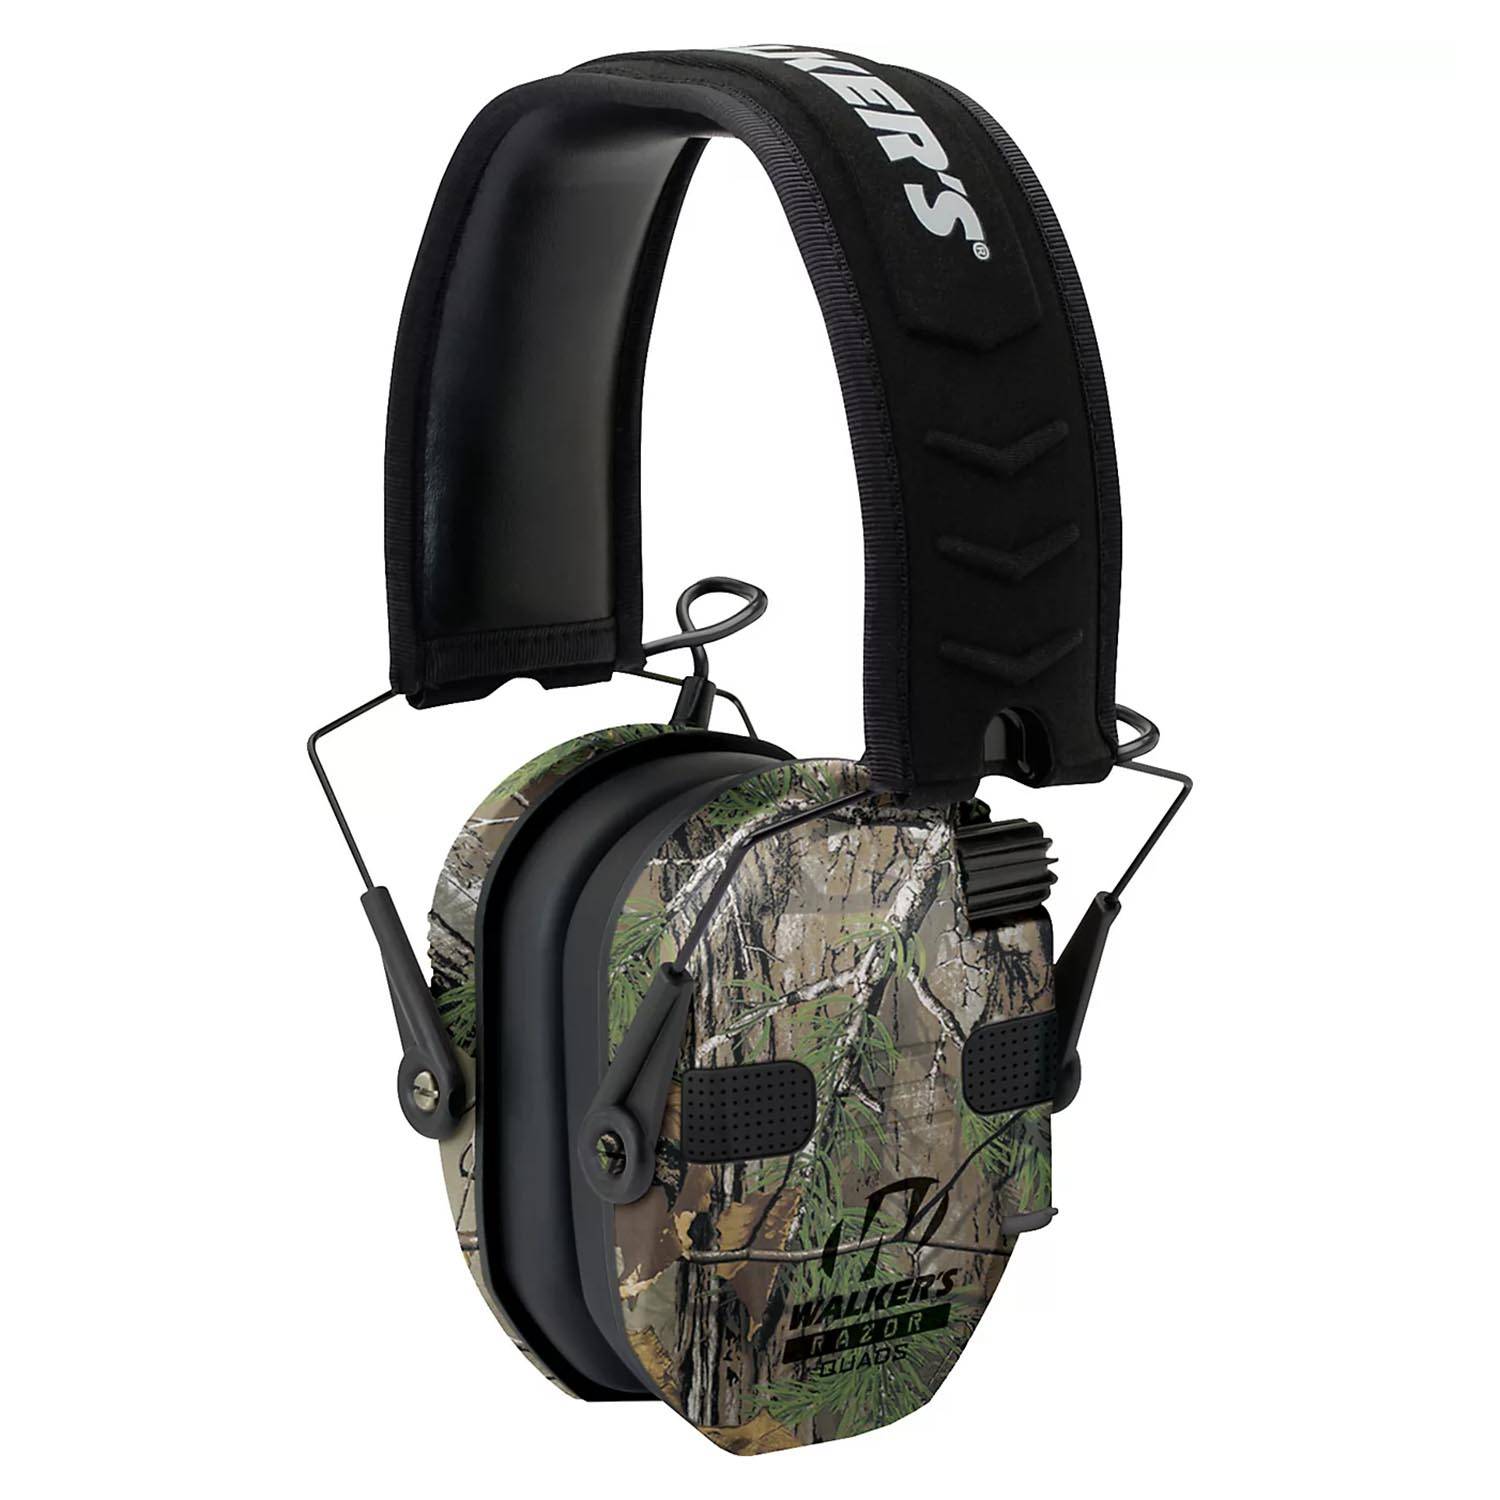 Walkers Razor Electronic Comm Muffs with Bluetooth